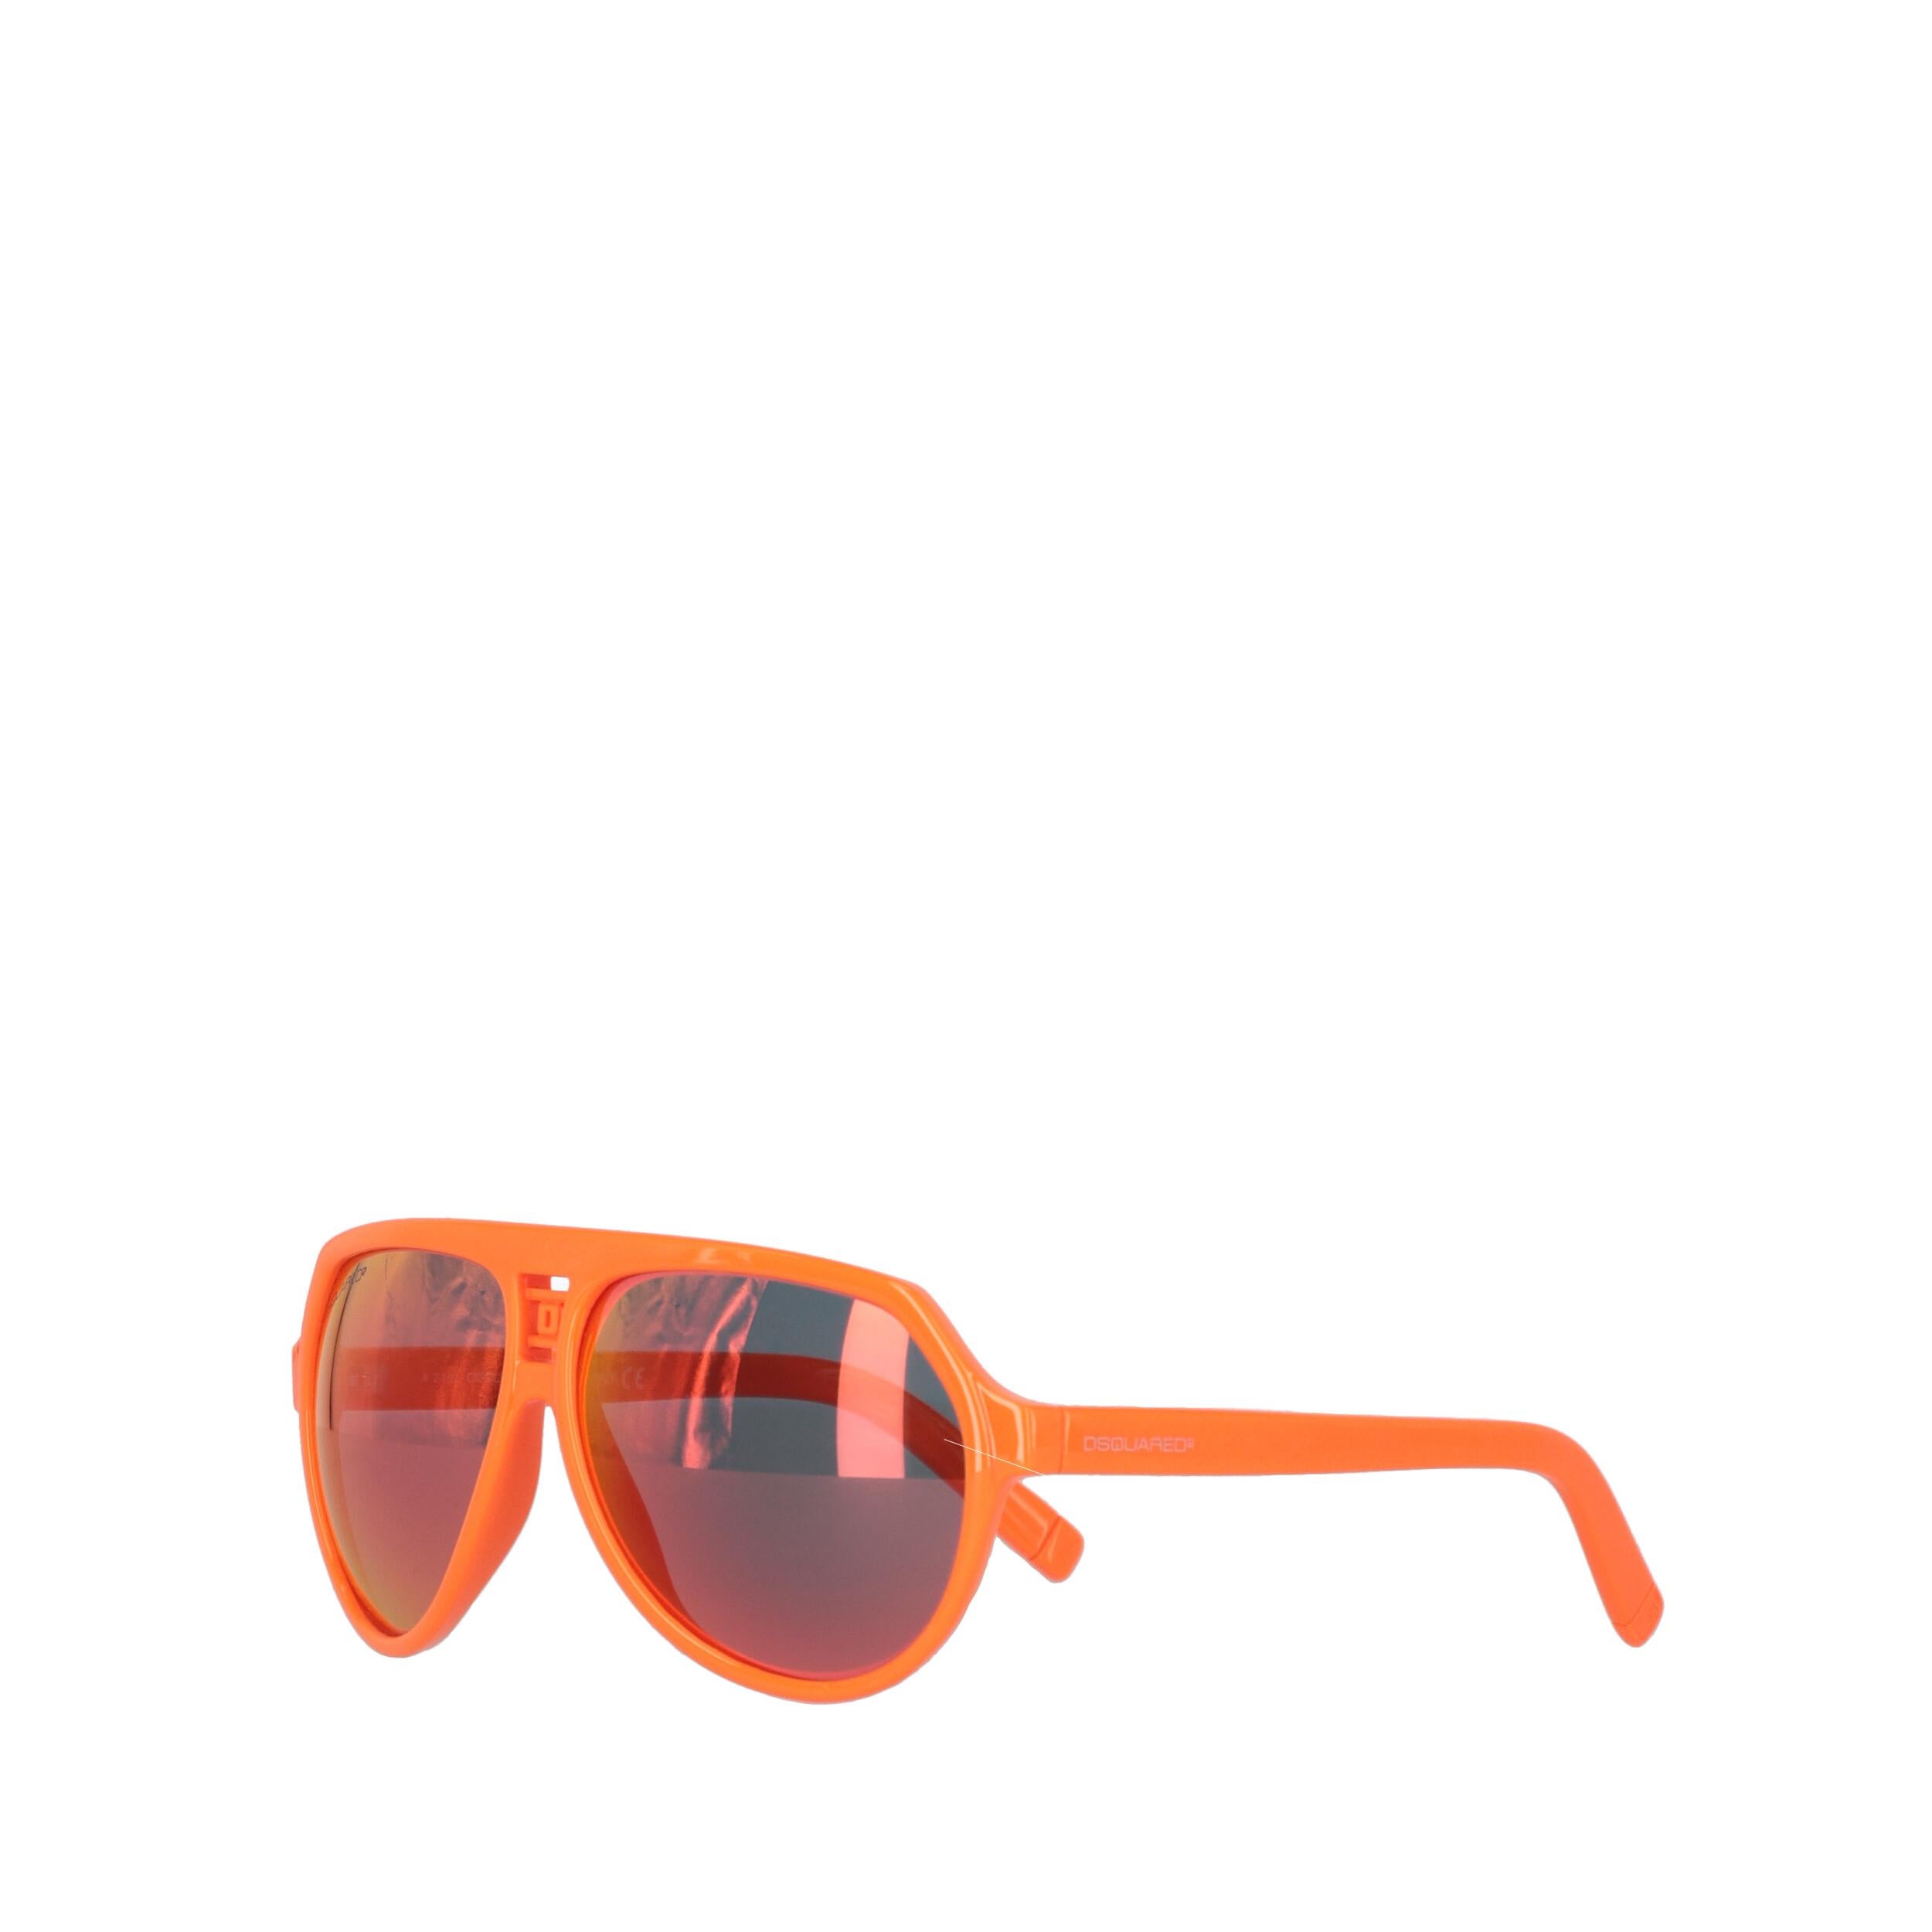 Dsquared2 fluo orange plastic mask frame sunglasses with mirrored lenses. 
Sunglasses show a light scratch on the right lens.

Please note, this item cannot be shipped to the US.

Epoca: anni 2010
Made in Italy

Larghezza: 14,5 cm
Altezza: 5,5 cm